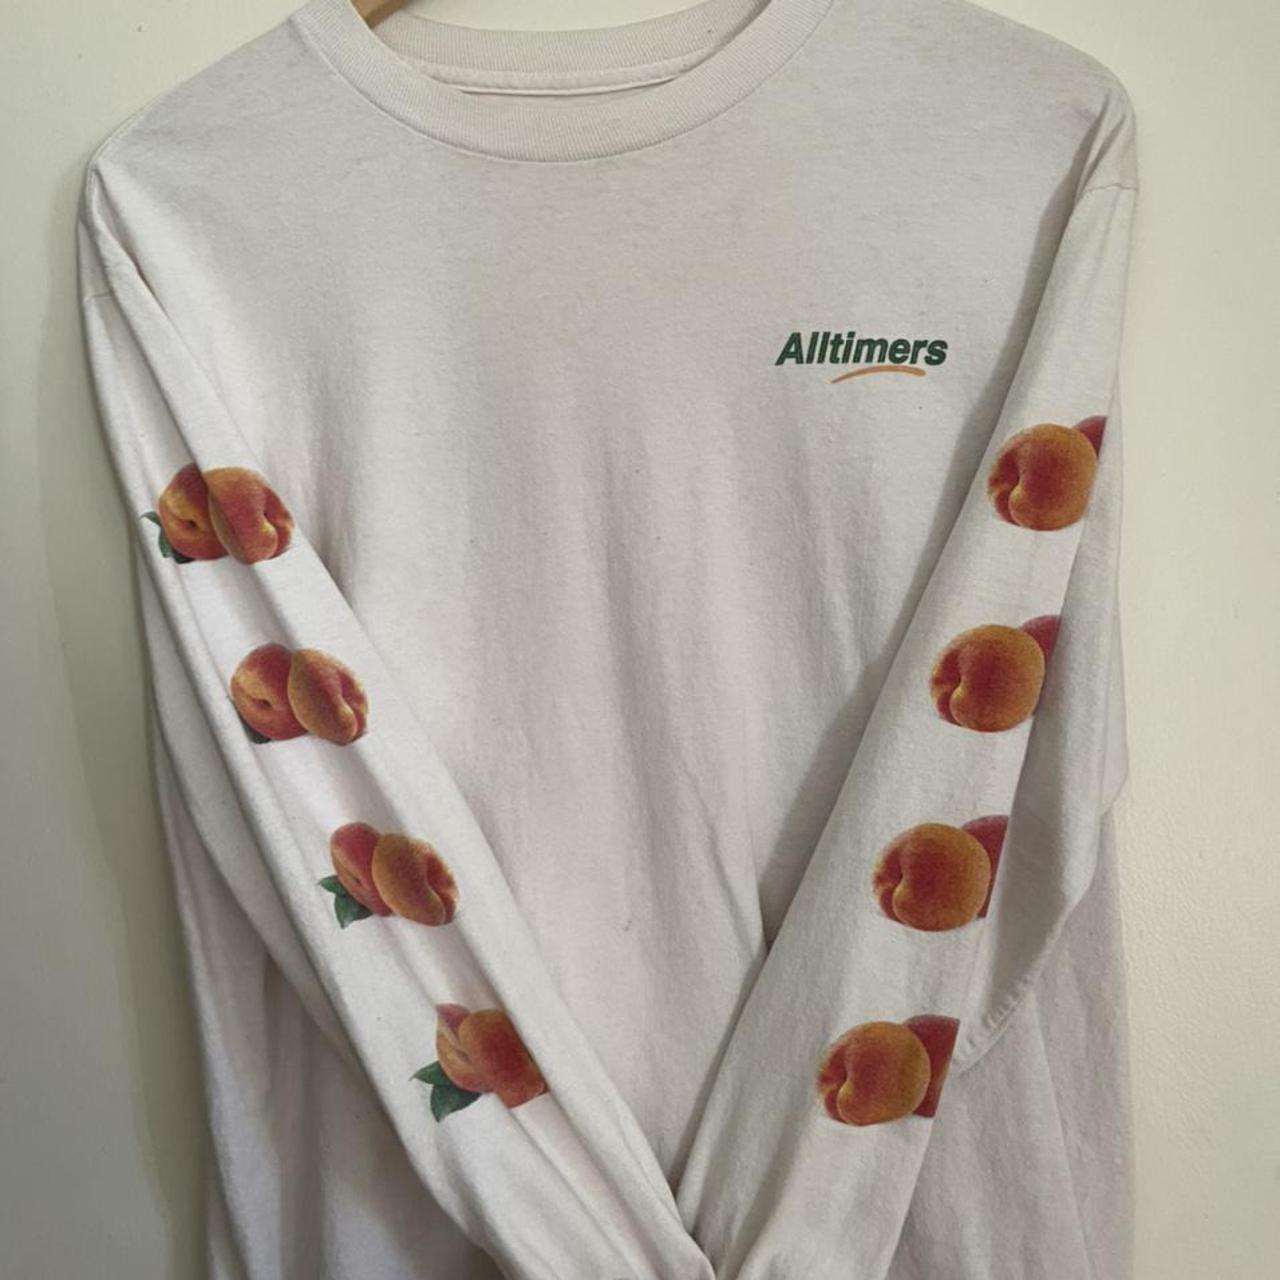 Product Image 4 - Alltimers Peachy Long Sleeve Tee

Bought